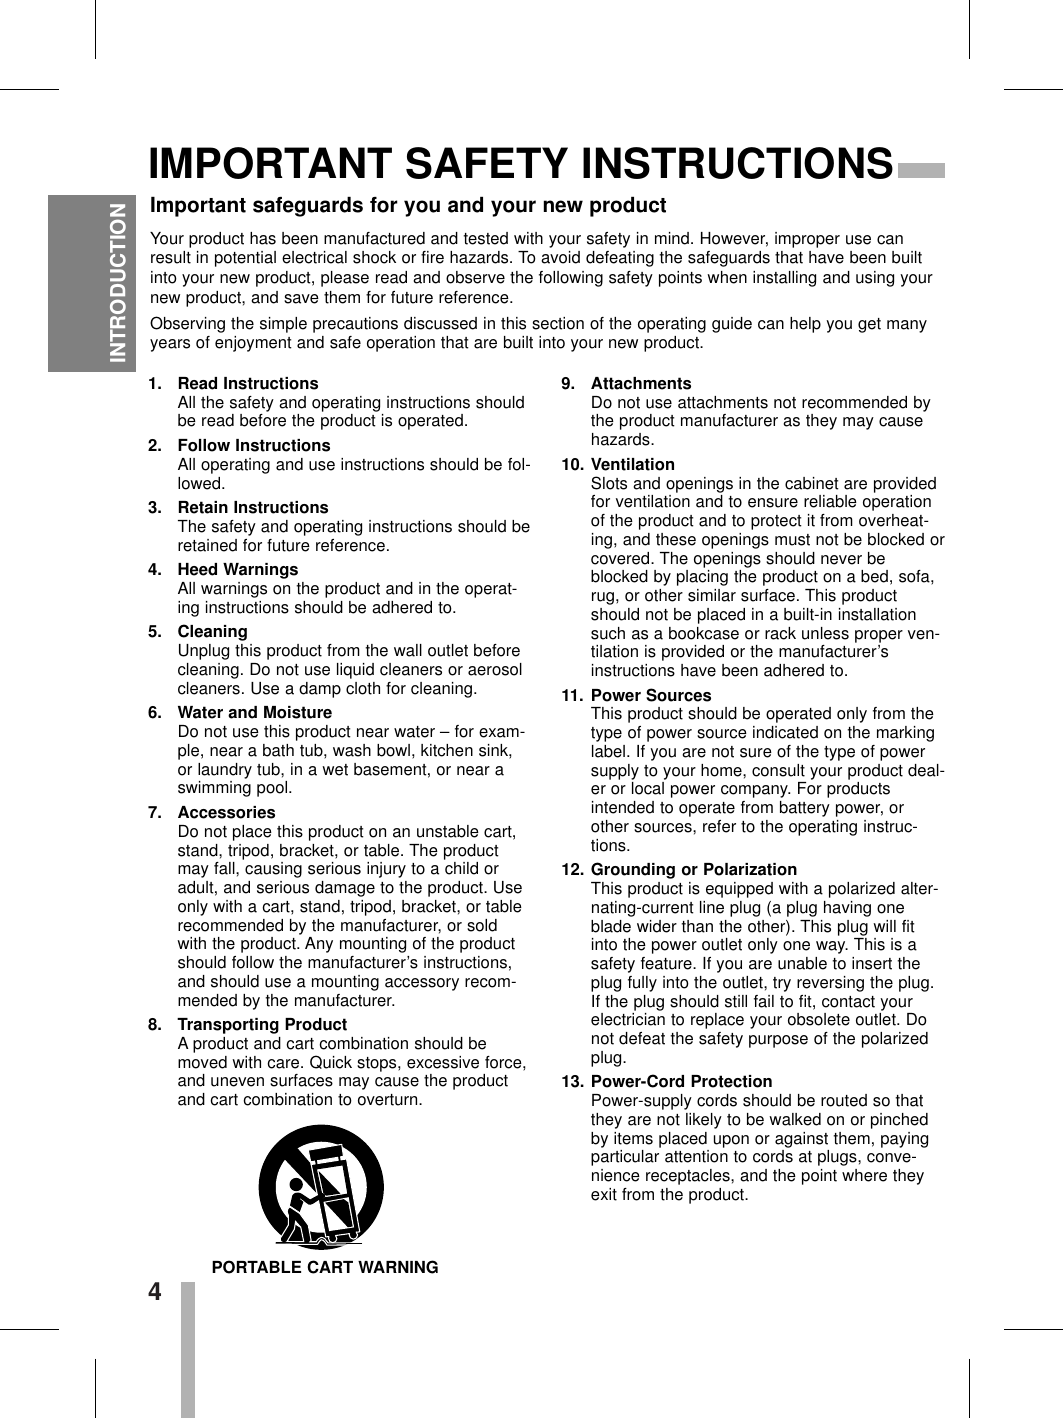 4INTRODUCTIONIMPORTANT SAFETY INSTRUCTIONS1. Read InstructionsAll the safety and operating instructions shouldbe read before the product is operated. 2. Follow InstructionsAll operating and use instructions should be fol-lowed.3. Retain InstructionsThe safety and operating instructions should beretained for future reference.4. Heed WarningsAll warnings on the product and in the operat-ing instructions should be adhered to.5. CleaningUnplug this product from the wall outlet beforecleaning. Do not use liquid cleaners or aerosolcleaners. Use a damp cloth for cleaning.6. Water and MoistureDo not use this product near water – for exam-ple, near a bath tub, wash bowl, kitchen sink,or laundry tub, in a wet basement, or near aswimming pool.7. AccessoriesDo not place this product on an unstable cart,stand, tripod, bracket, or table. The productmay fall, causing serious injury to a child oradult, and serious damage to the product. Useonly with a cart, stand, tripod, bracket, or tablerecommended by the manufacturer, or soldwith the product. Any mounting of the productshould follow the manufacturer’s instructions,and should use a mounting accessory recom-mended by the manufacturer.8. Transporting ProductA product and cart combination should bemoved with care. Quick stops, excessive force,and uneven surfaces may cause the productand cart combination to overturn.9. AttachmentsDo not use attachments not recommended bythe product manufacturer as they may causehazards.10. VentilationSlots and openings in the cabinet are providedfor ventilation and to ensure reliable operationof the product and to protect it from overheat-ing, and these openings must not be blocked orcovered. The openings should never beblocked by placing the product on a bed, sofa,rug, or other similar surface. This productshould not be placed in a built-in installationsuch as a bookcase or rack unless proper ven-tilation is provided or the manufacturer’sinstructions have been adhered to.11. Power SourcesThis product should be operated only from thetype of power source indicated on the markinglabel. If you are not sure of the type of powersupply to your home, consult your product deal-er or local power company. For productsintended to operate from battery power, orother sources, refer to the operating instruc-tions.12. Grounding or PolarizationThis product is equipped with a polarized alter-nating-current line plug (a plug having oneblade wider than the other). This plug will fitinto the power outlet only one way. This is asafety feature. If you are unable to insert theplug fully into the outlet, try reversing the plug.If the plug should still fail to fit, contact yourelectrician to replace your obsolete outlet. Donot defeat the safety purpose of the polarizedplug.13. Power-Cord ProtectionPower-supply cords should be routed so thatthey are not likely to be walked on or pinchedby items placed upon or against them, payingparticular attention to cords at plugs, conve-nience receptacles, and the point where theyexit from the product.PORTABLE CART WARNINGImportant safeguards for you and your new productYour product has been manufactured and tested with your safety in mind. However, improper use canresult in potential electrical shock or fire hazards. To avoid defeating the safeguards that have been builtinto your new product, please read and observe the following safety points when installing and using yournew product, and save them for future reference.Observing the simple precautions discussed in this section of the operating guide can help you get manyyears of enjoyment and safe operation that are built into your new product.